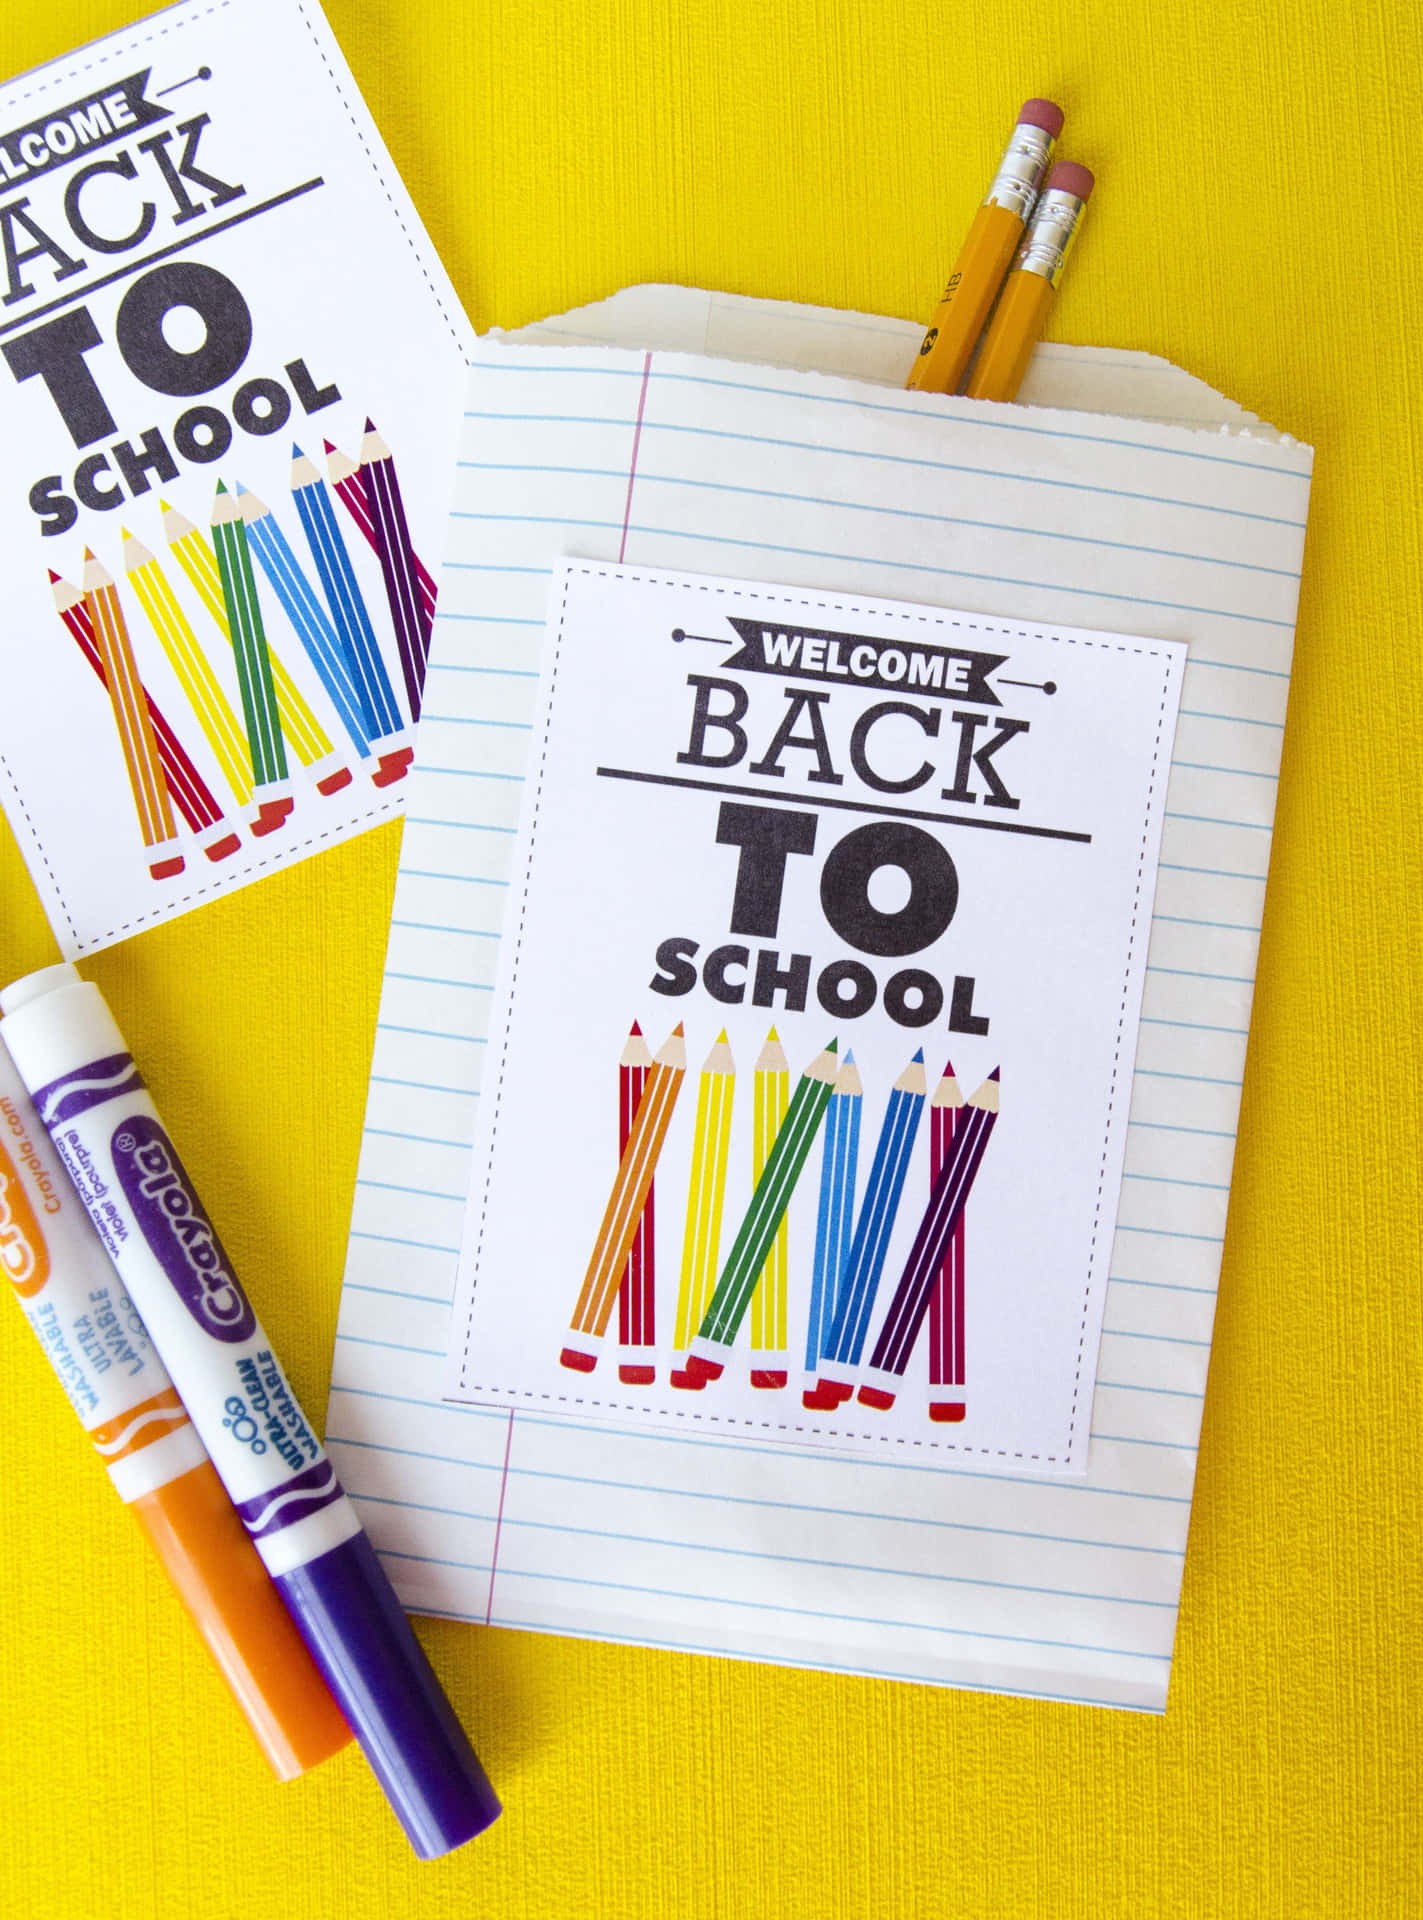 A Back To School Bag With Crayons And Markers